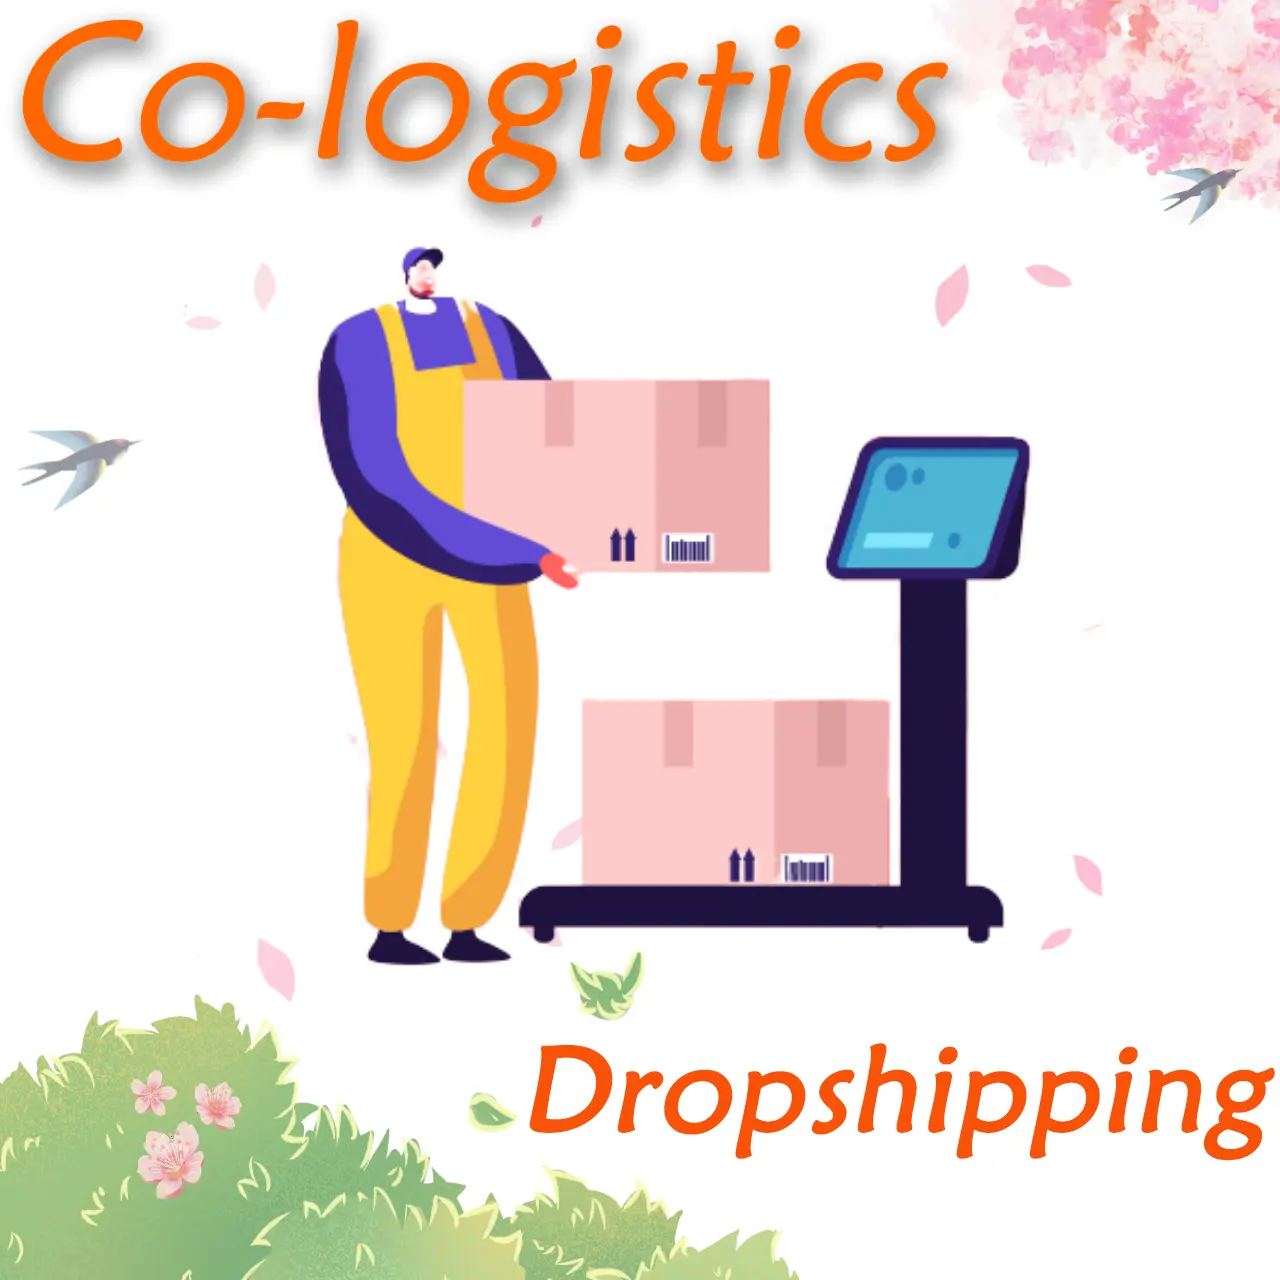 Shenzhen freight forwarder dropshipping shoes from China to USA ddp service